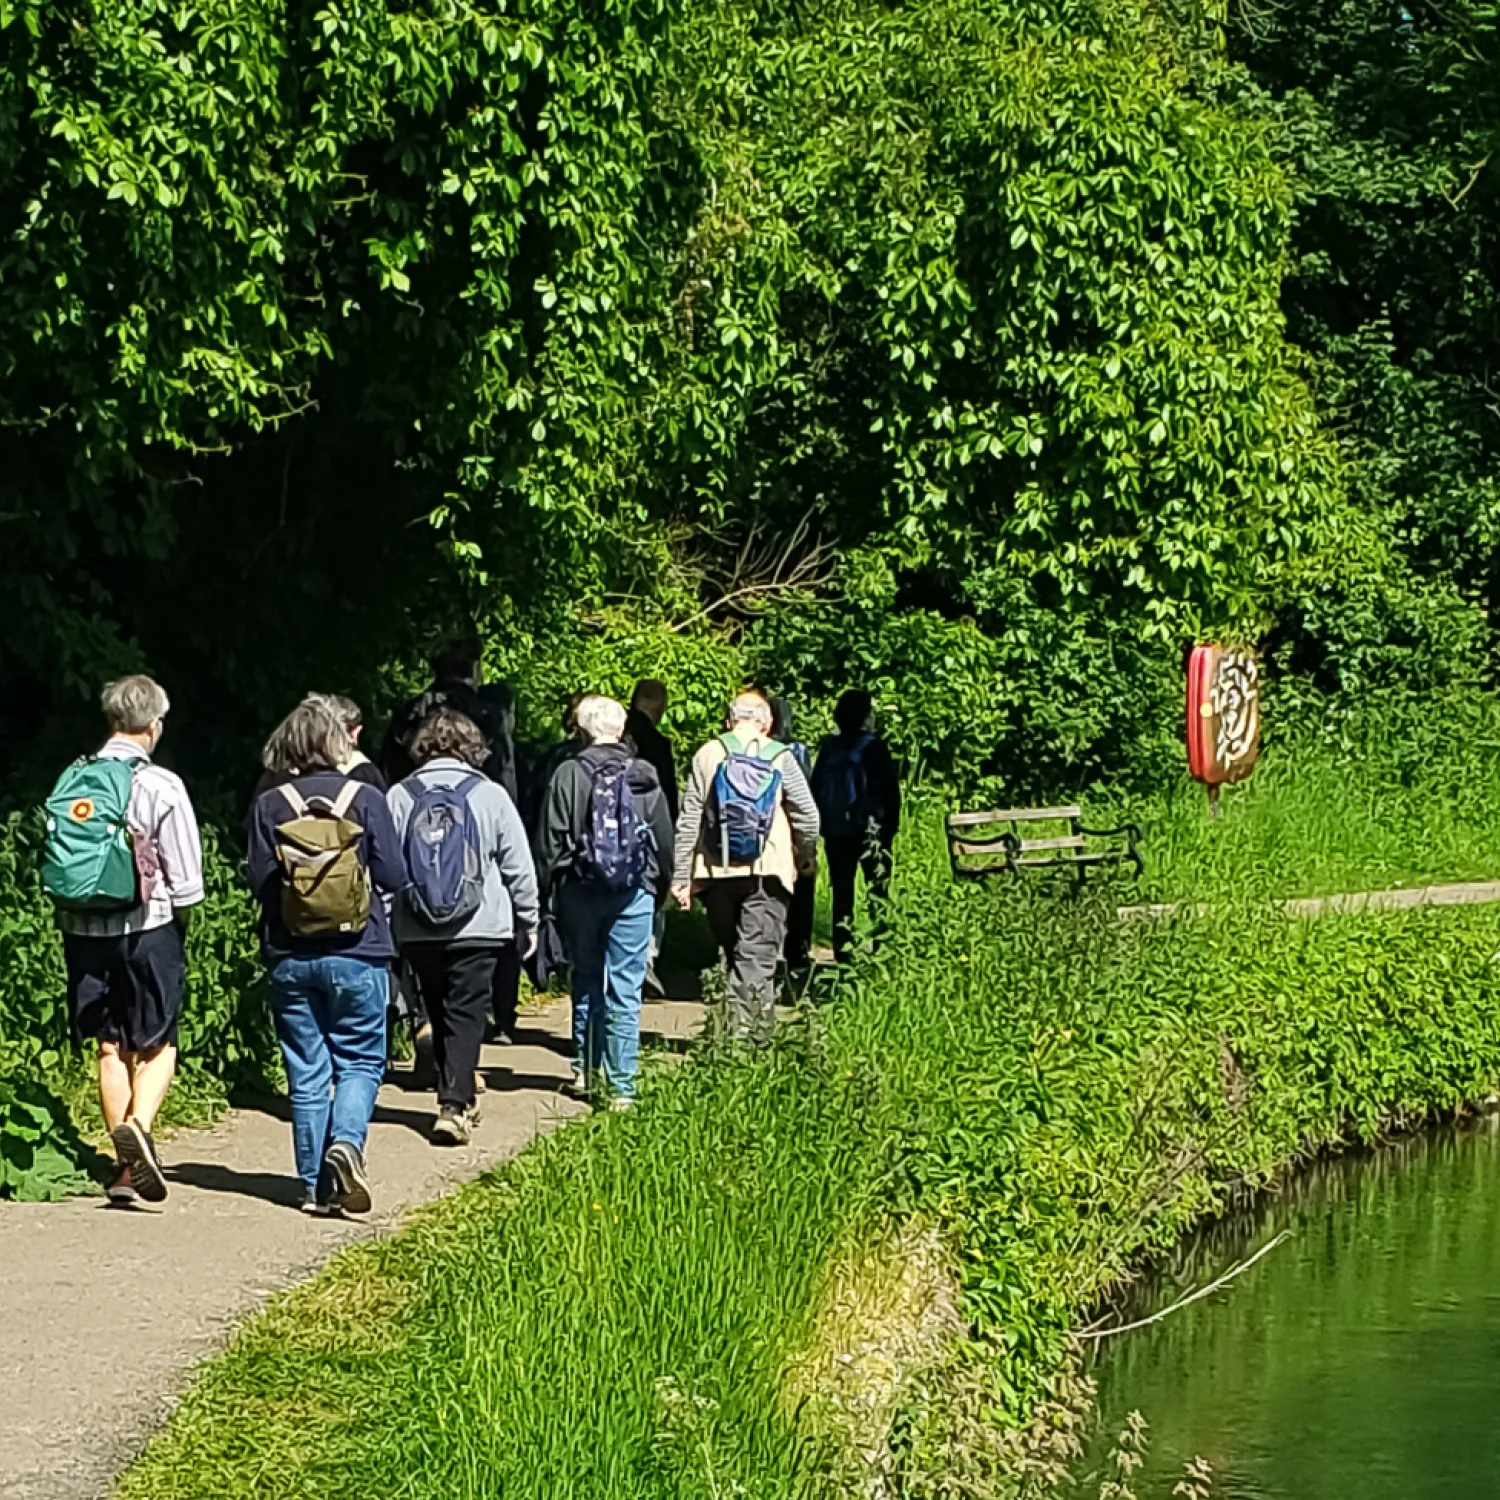 A small group of pilgrims walk past a bend in the river Thames